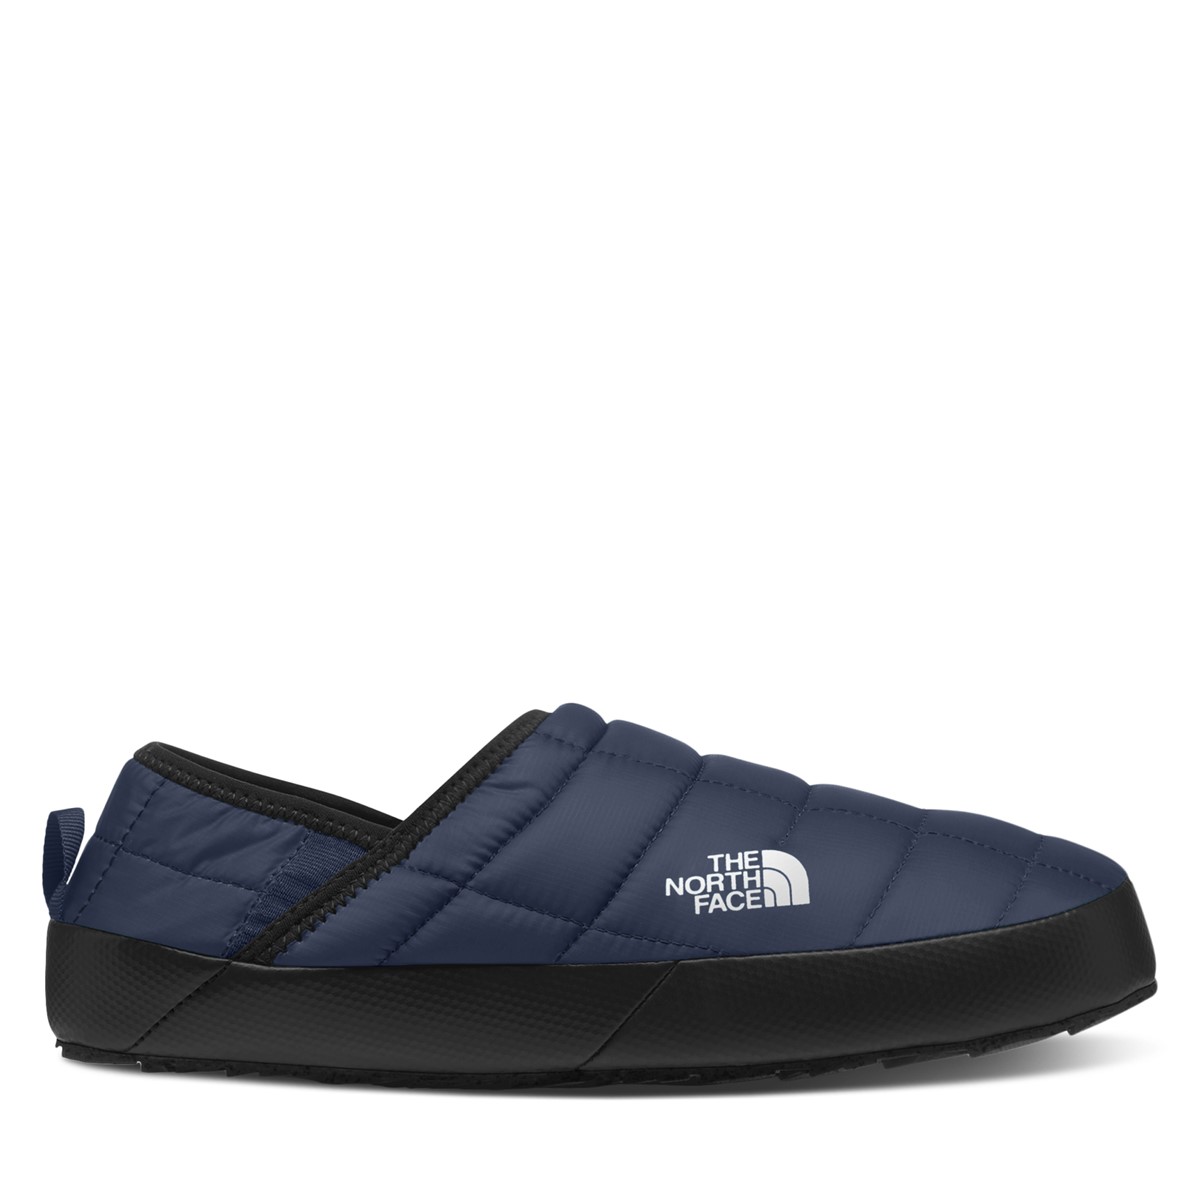 Mules Thermoball V Traction bleu marine et noires pour hommes